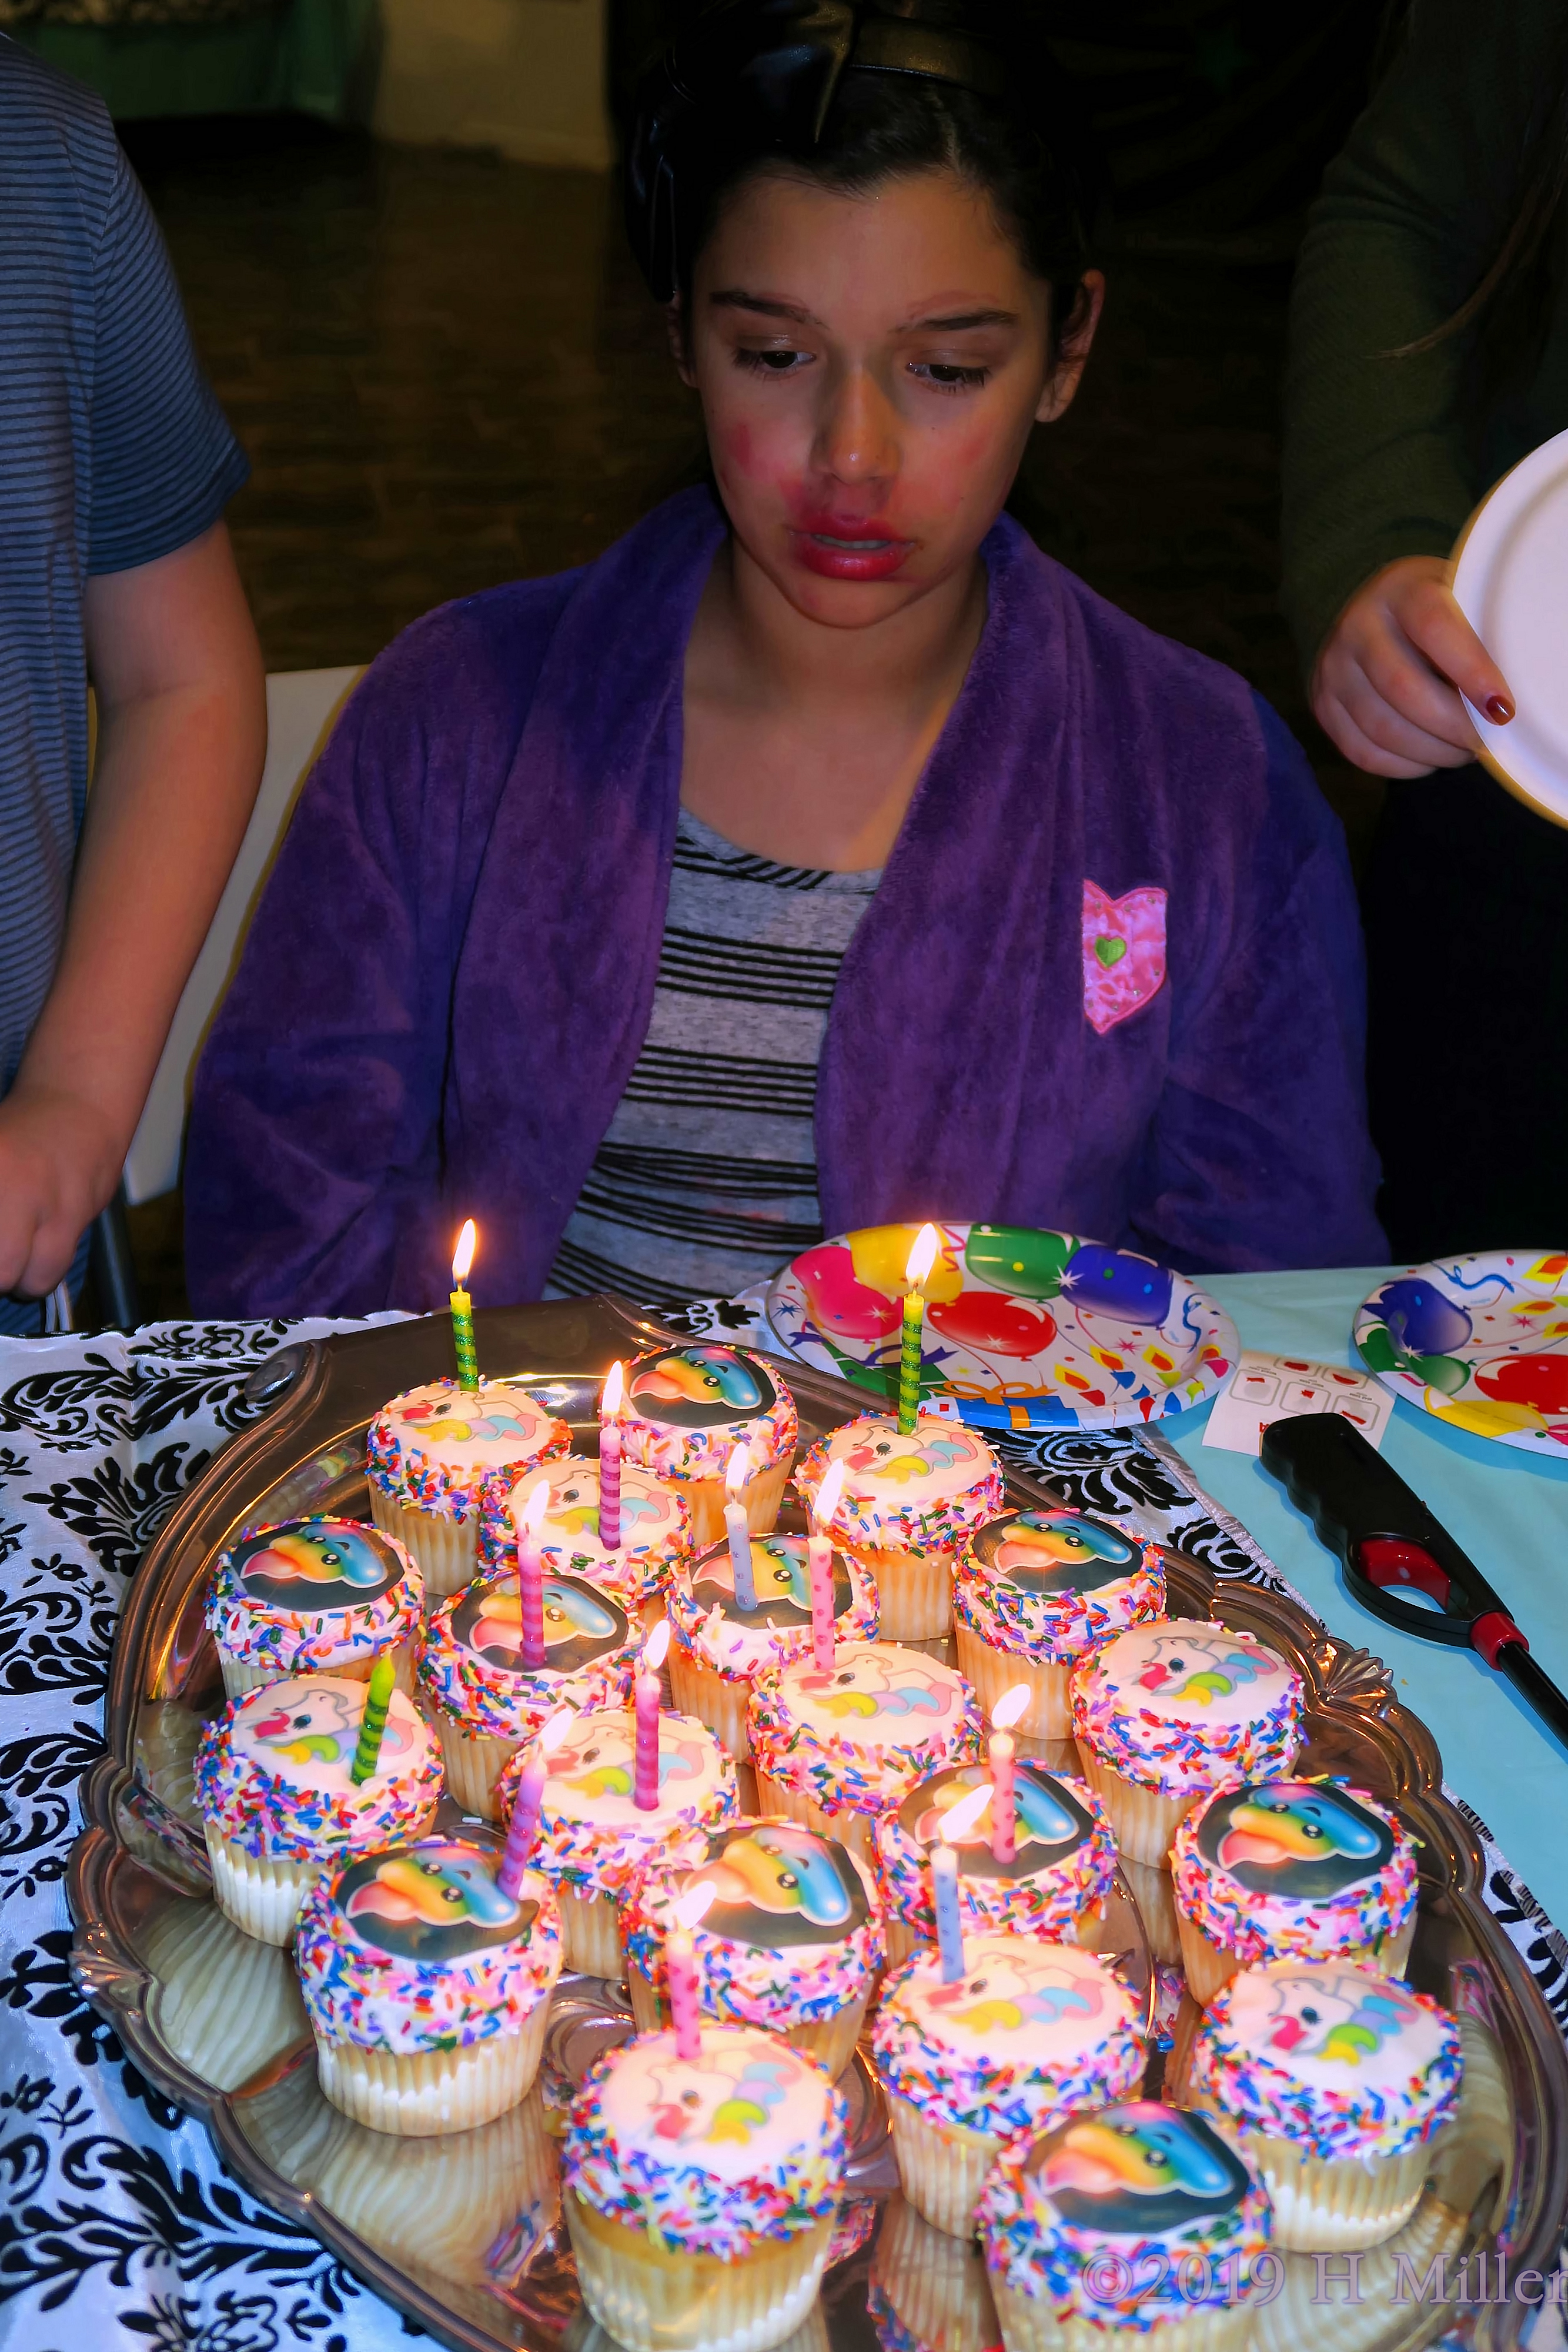 Celebrating With Cupcakes! Birthday Cupcakes At Spa Party For Kids! 4